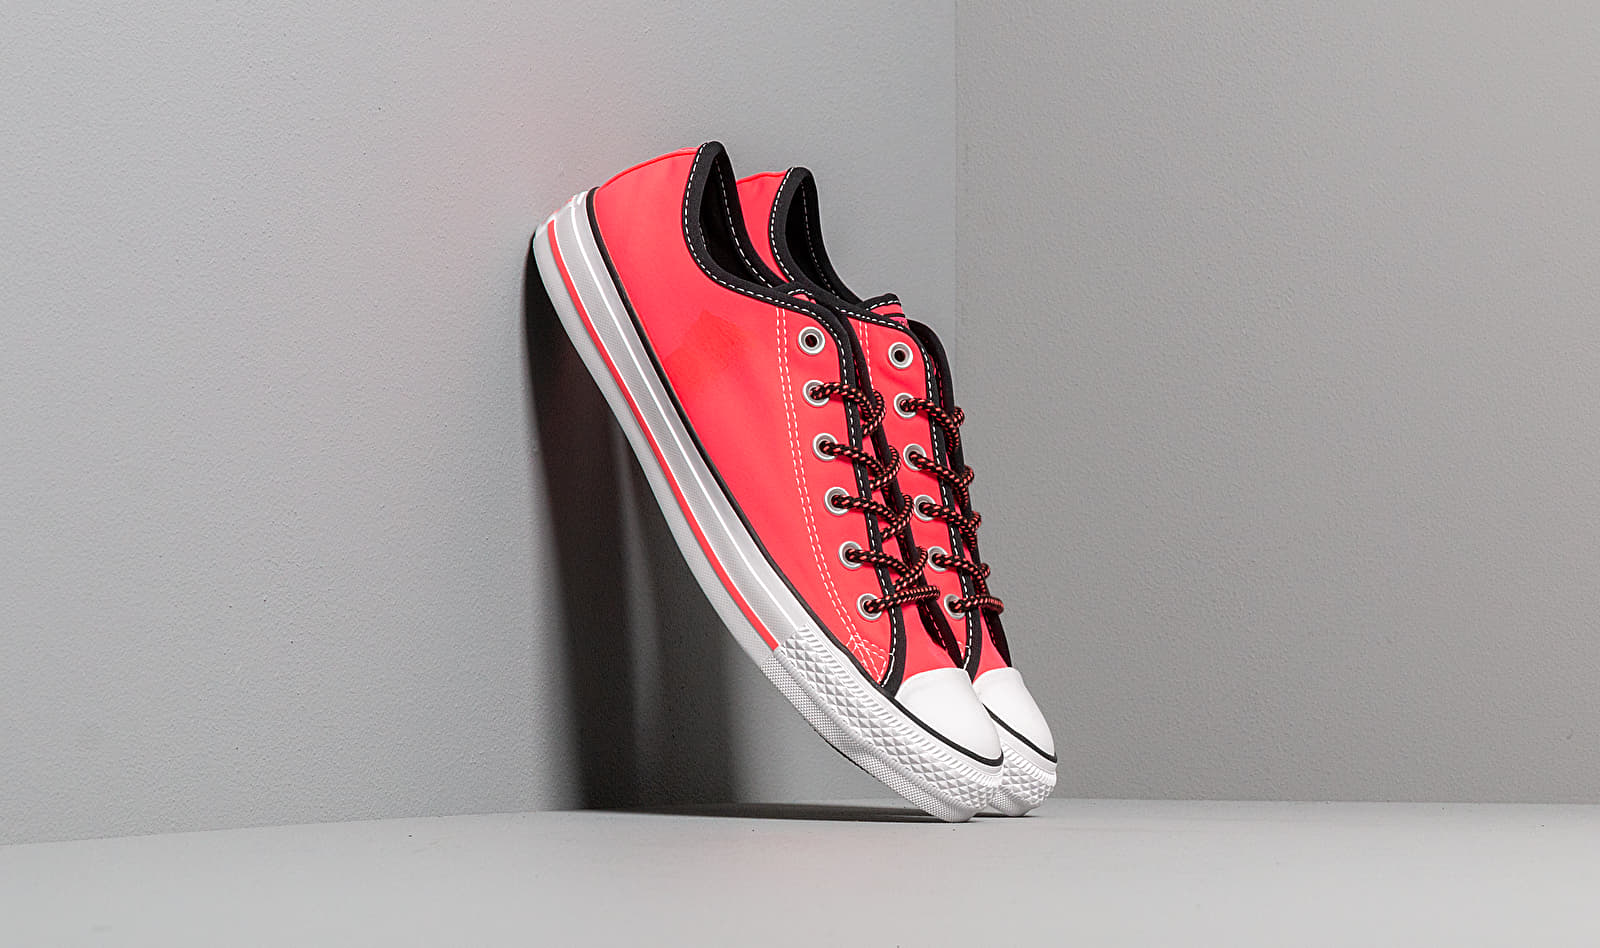 Converse Chuck Taylor All Star Racer Pink/ Black/ White 164094C